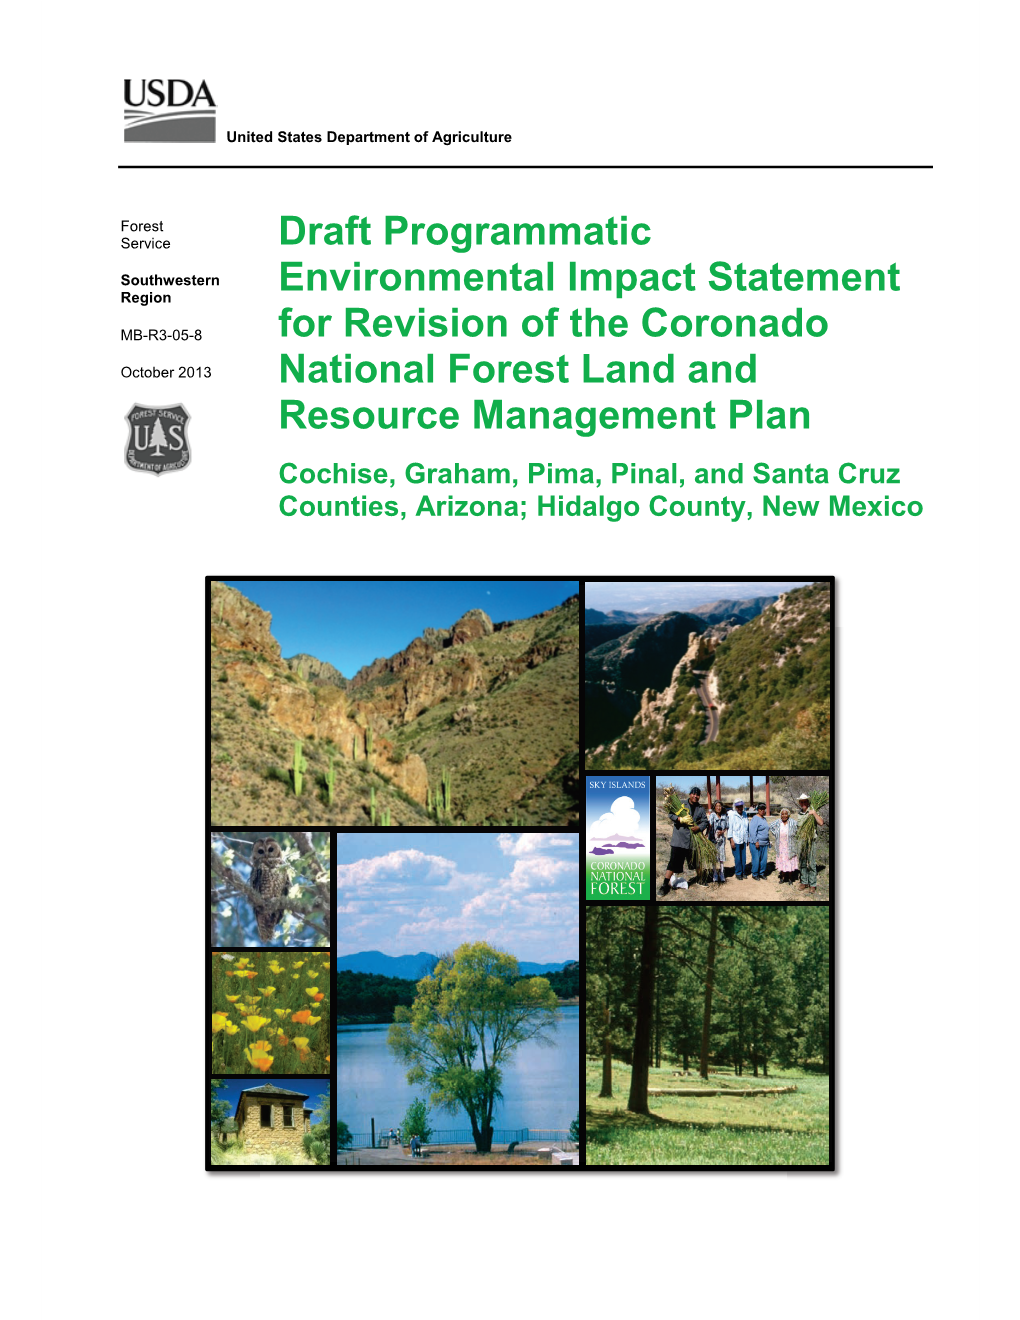 Draft Programmatic Environmental Impact Statement for Revision of the Coronado National Forest Land and Resource Management Plan